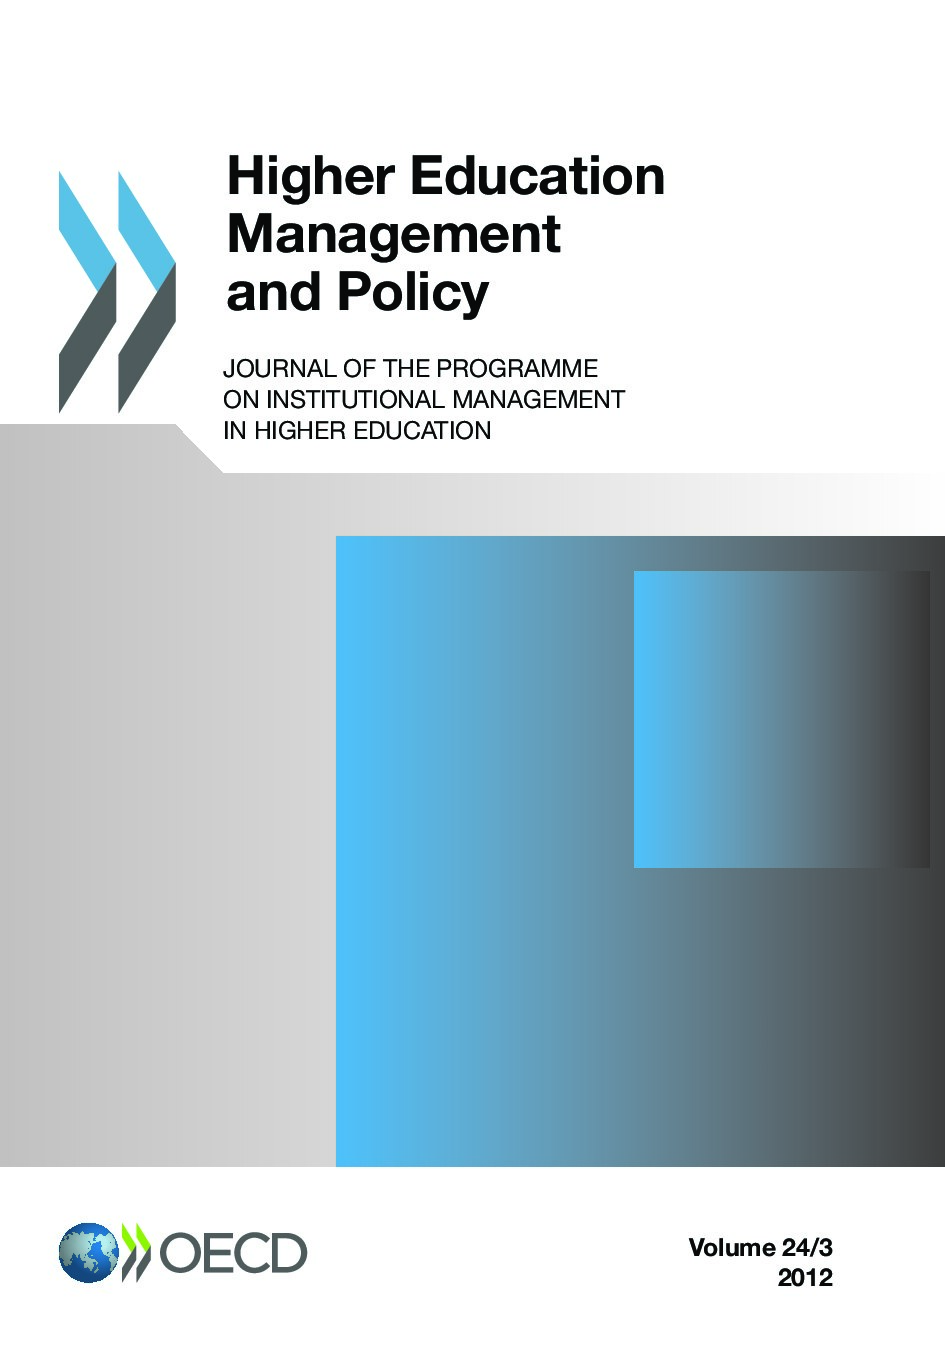 Higher Education Management and Policy, Volume 24 Issue 3